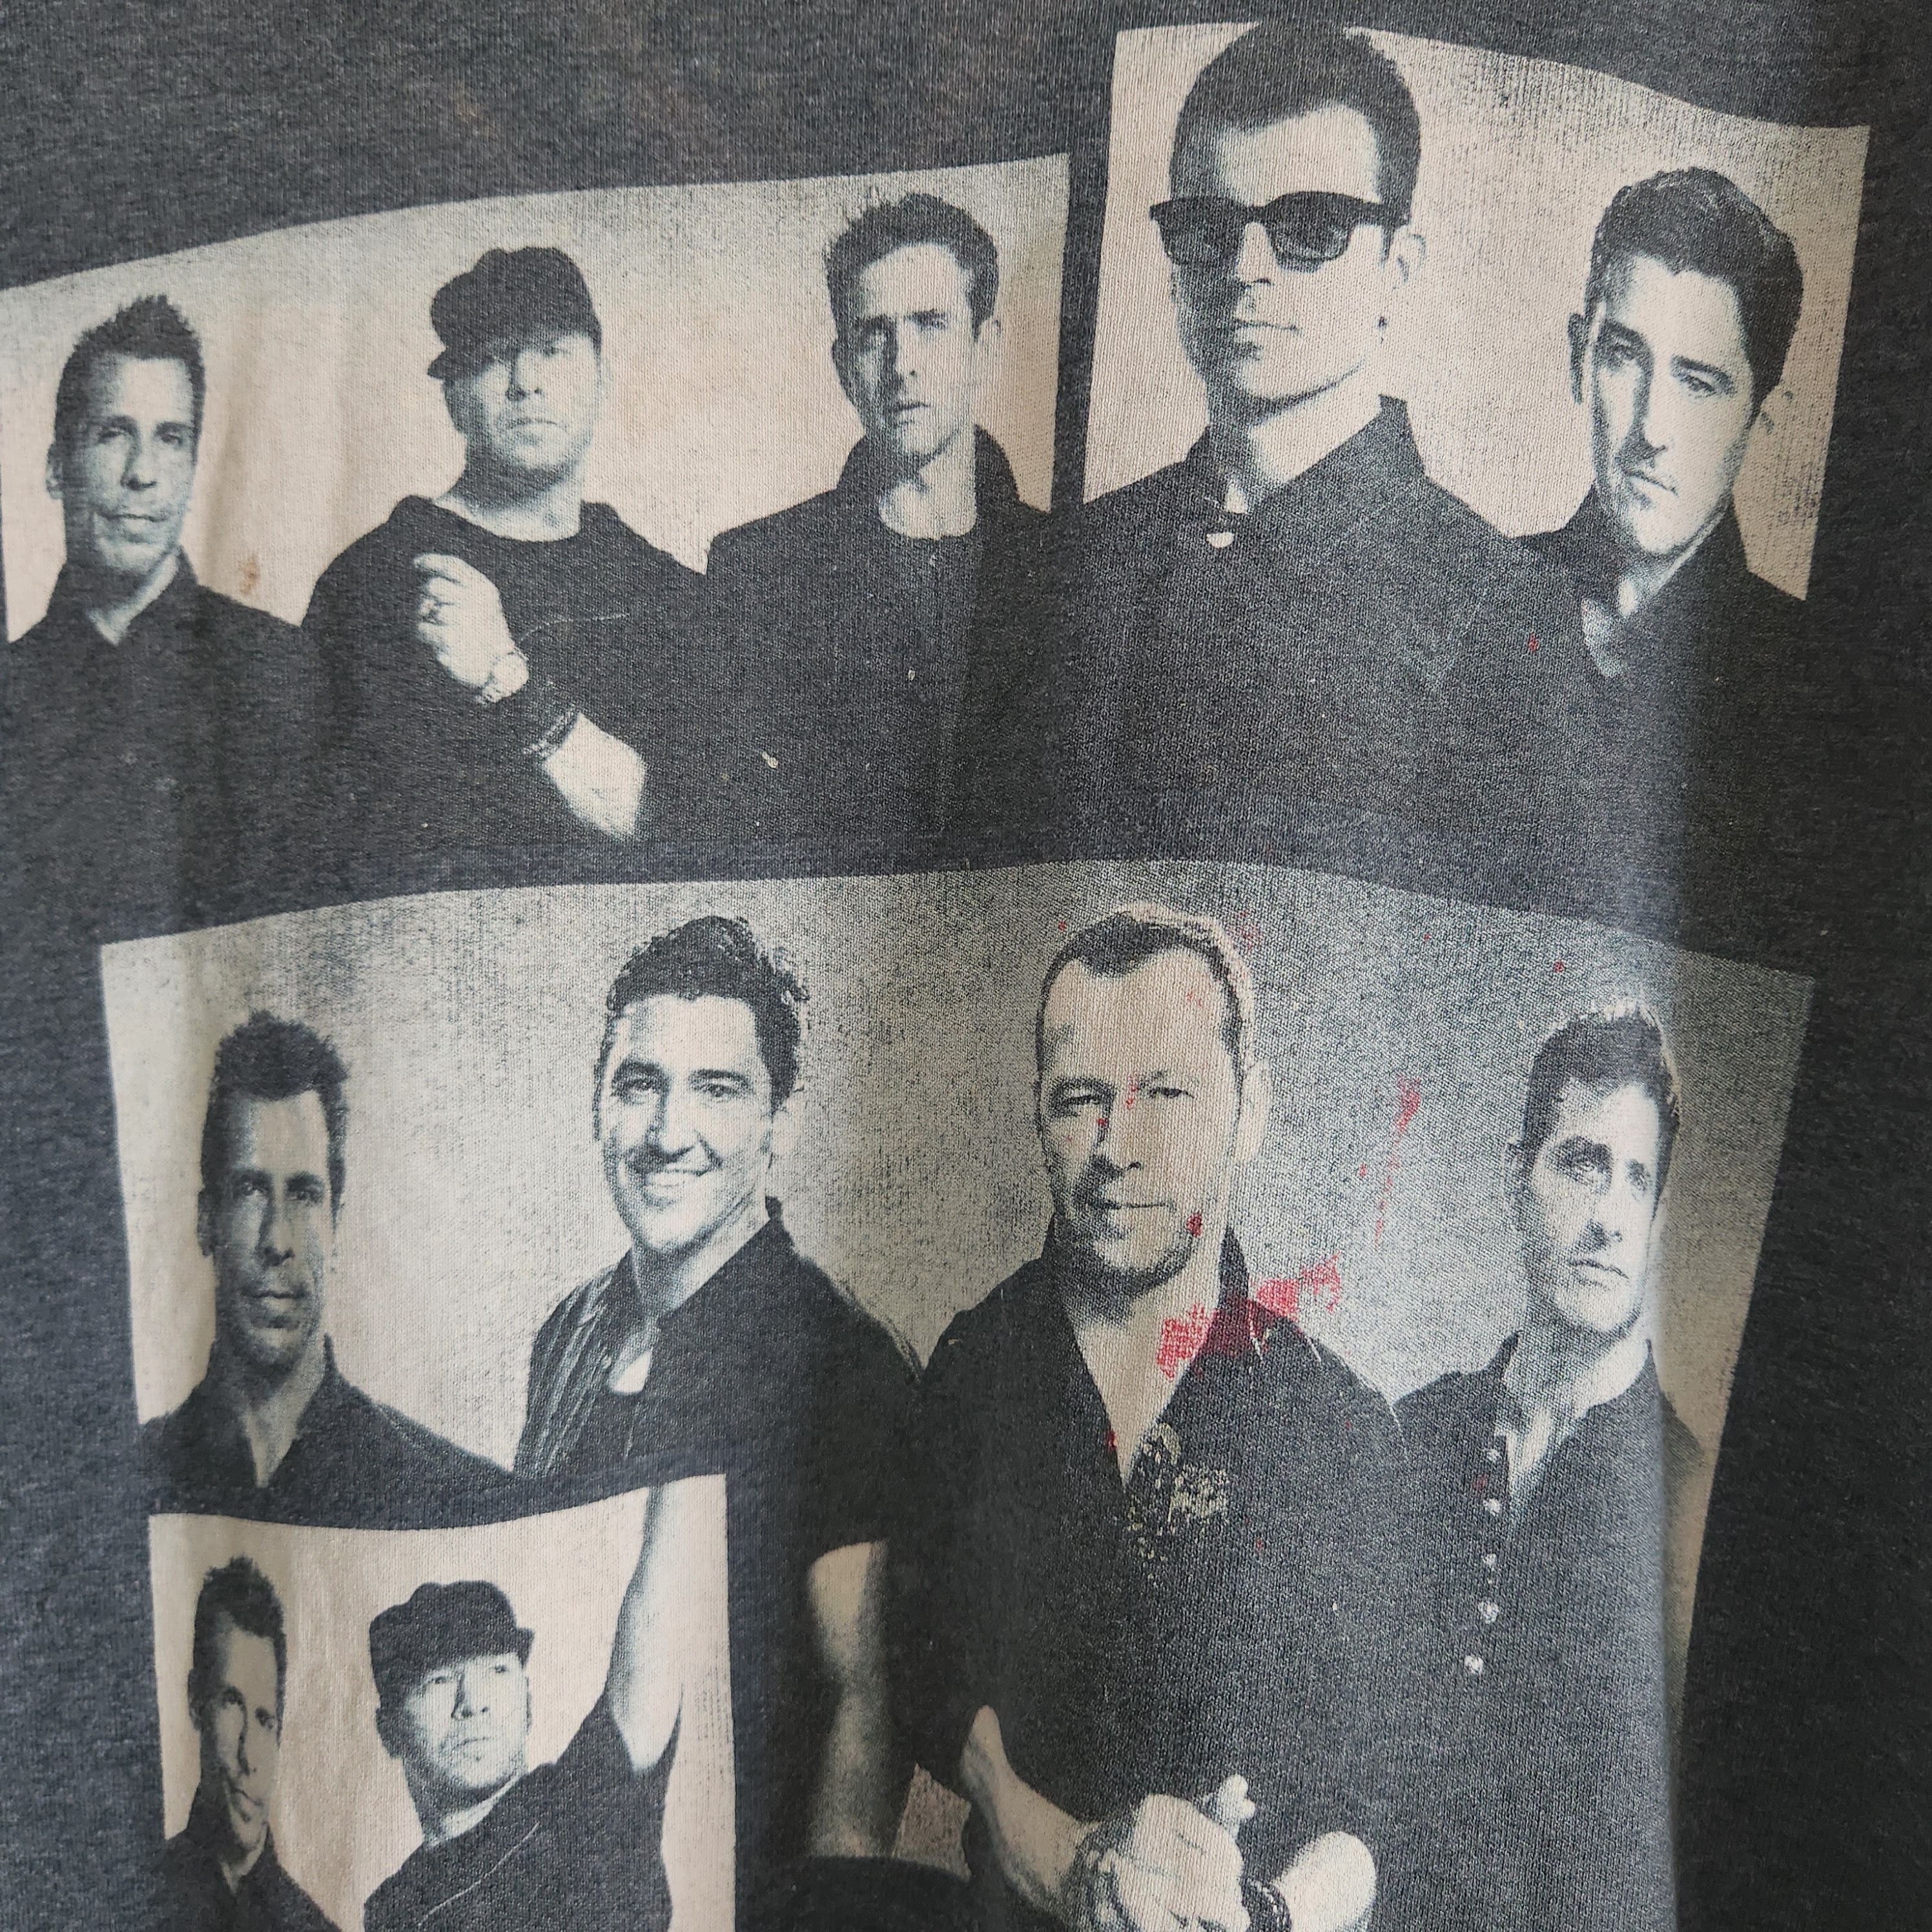 Band Tees - New Kids On The Block TShirt Copyright 2015 - 13